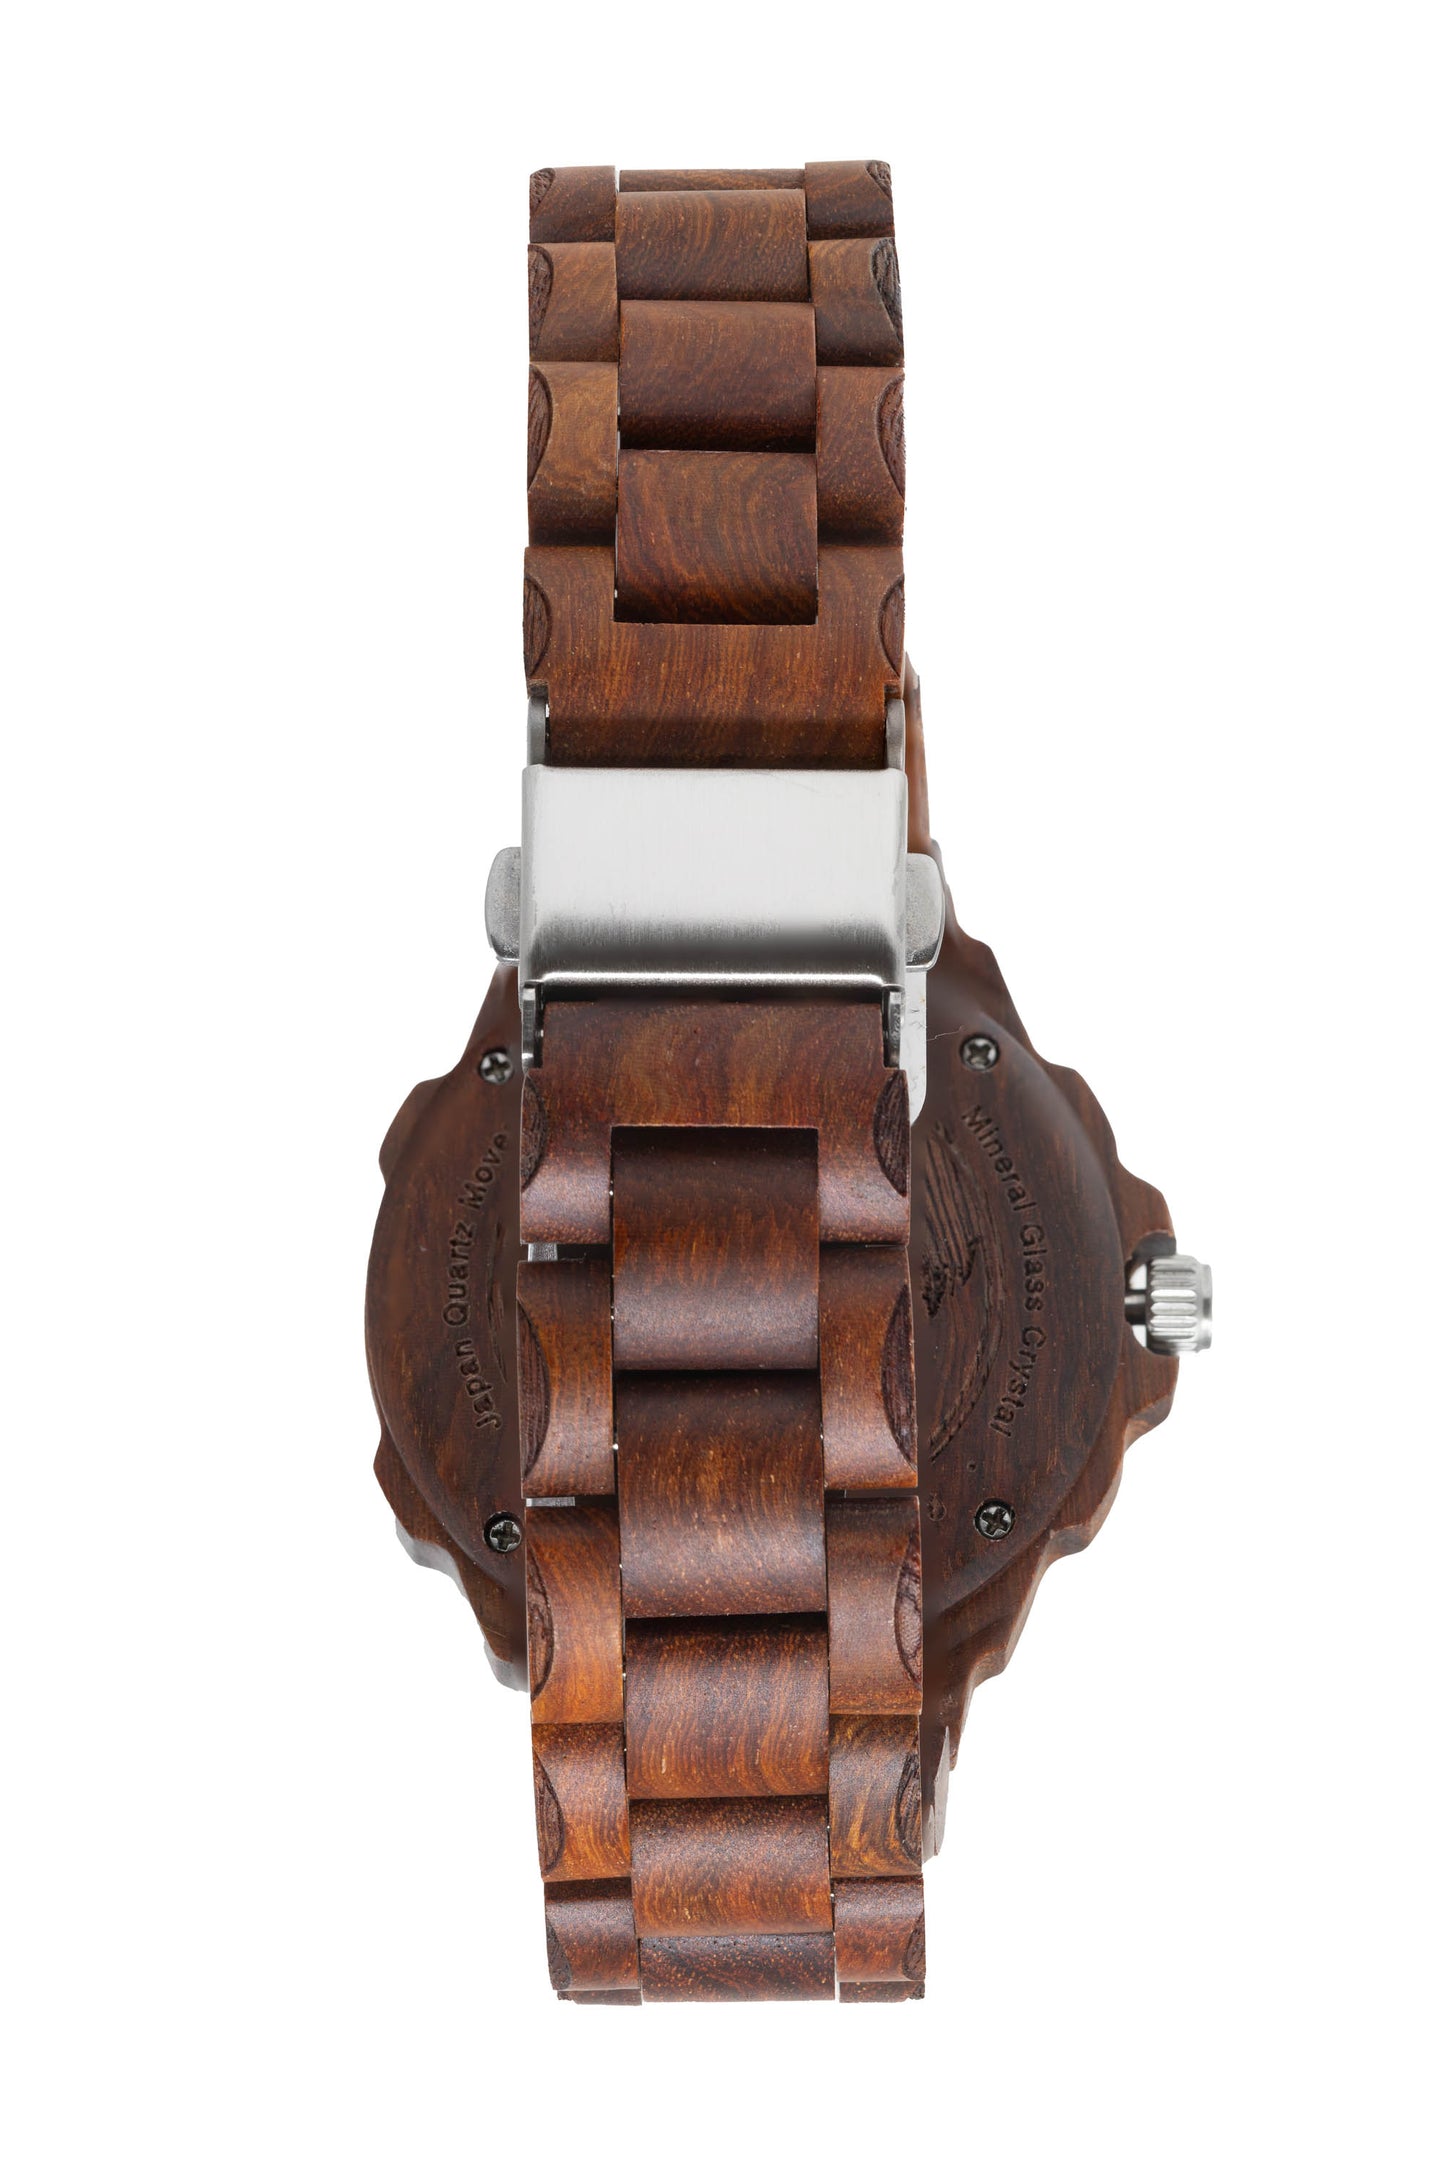 Wood Spider Midsize - Red Sandalwood Case and Band. Blue Sunray Dial